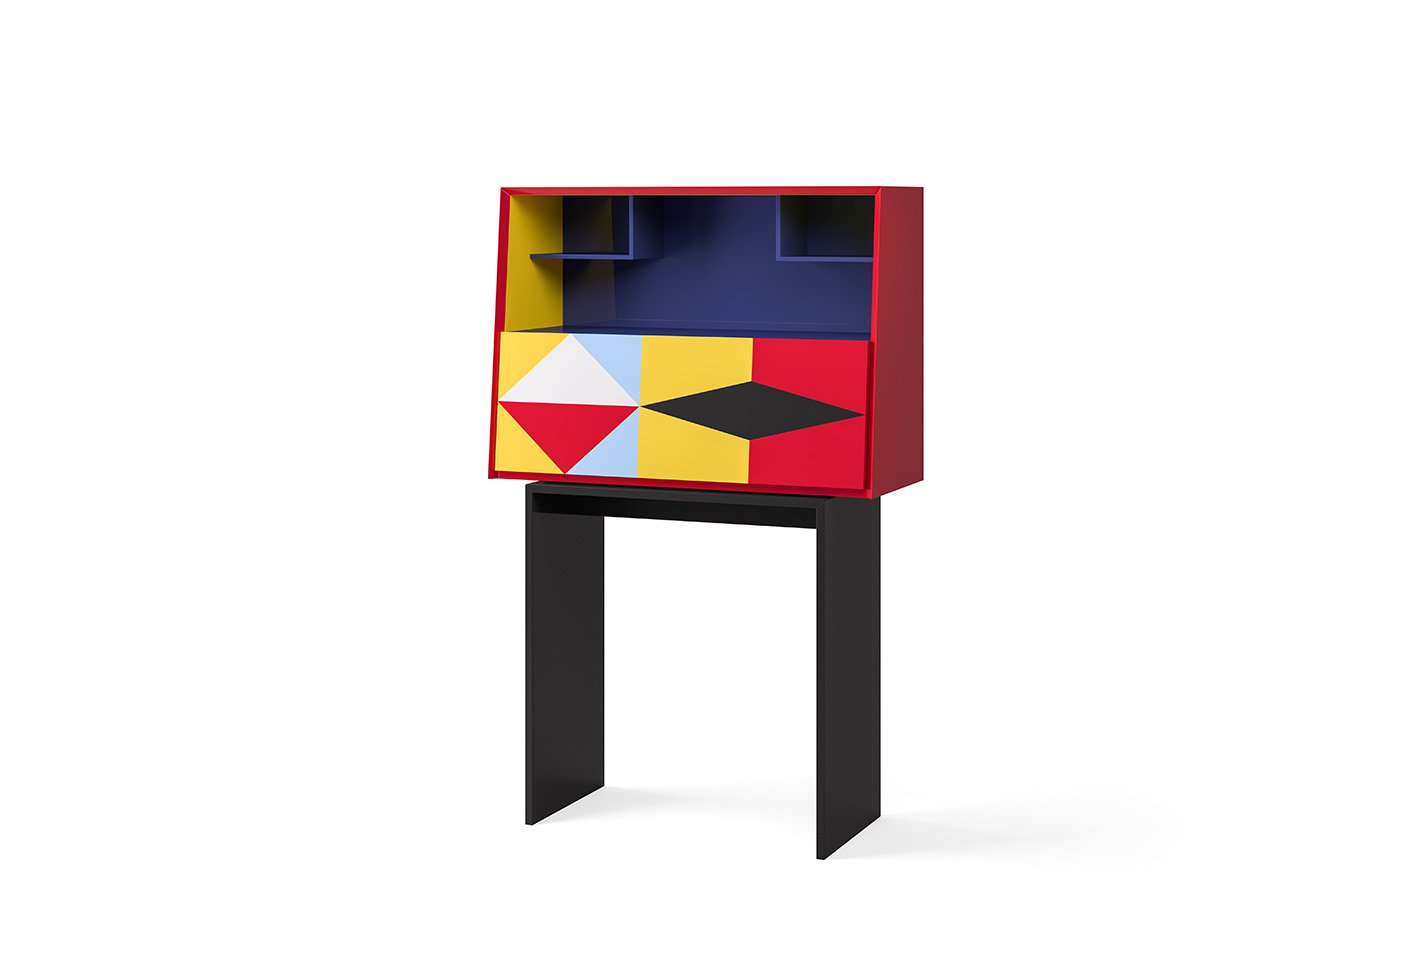 Alessandro Mendini's colourful Linea writing desk with flap top, internal partitions and dark base. Photo c/o Porro.